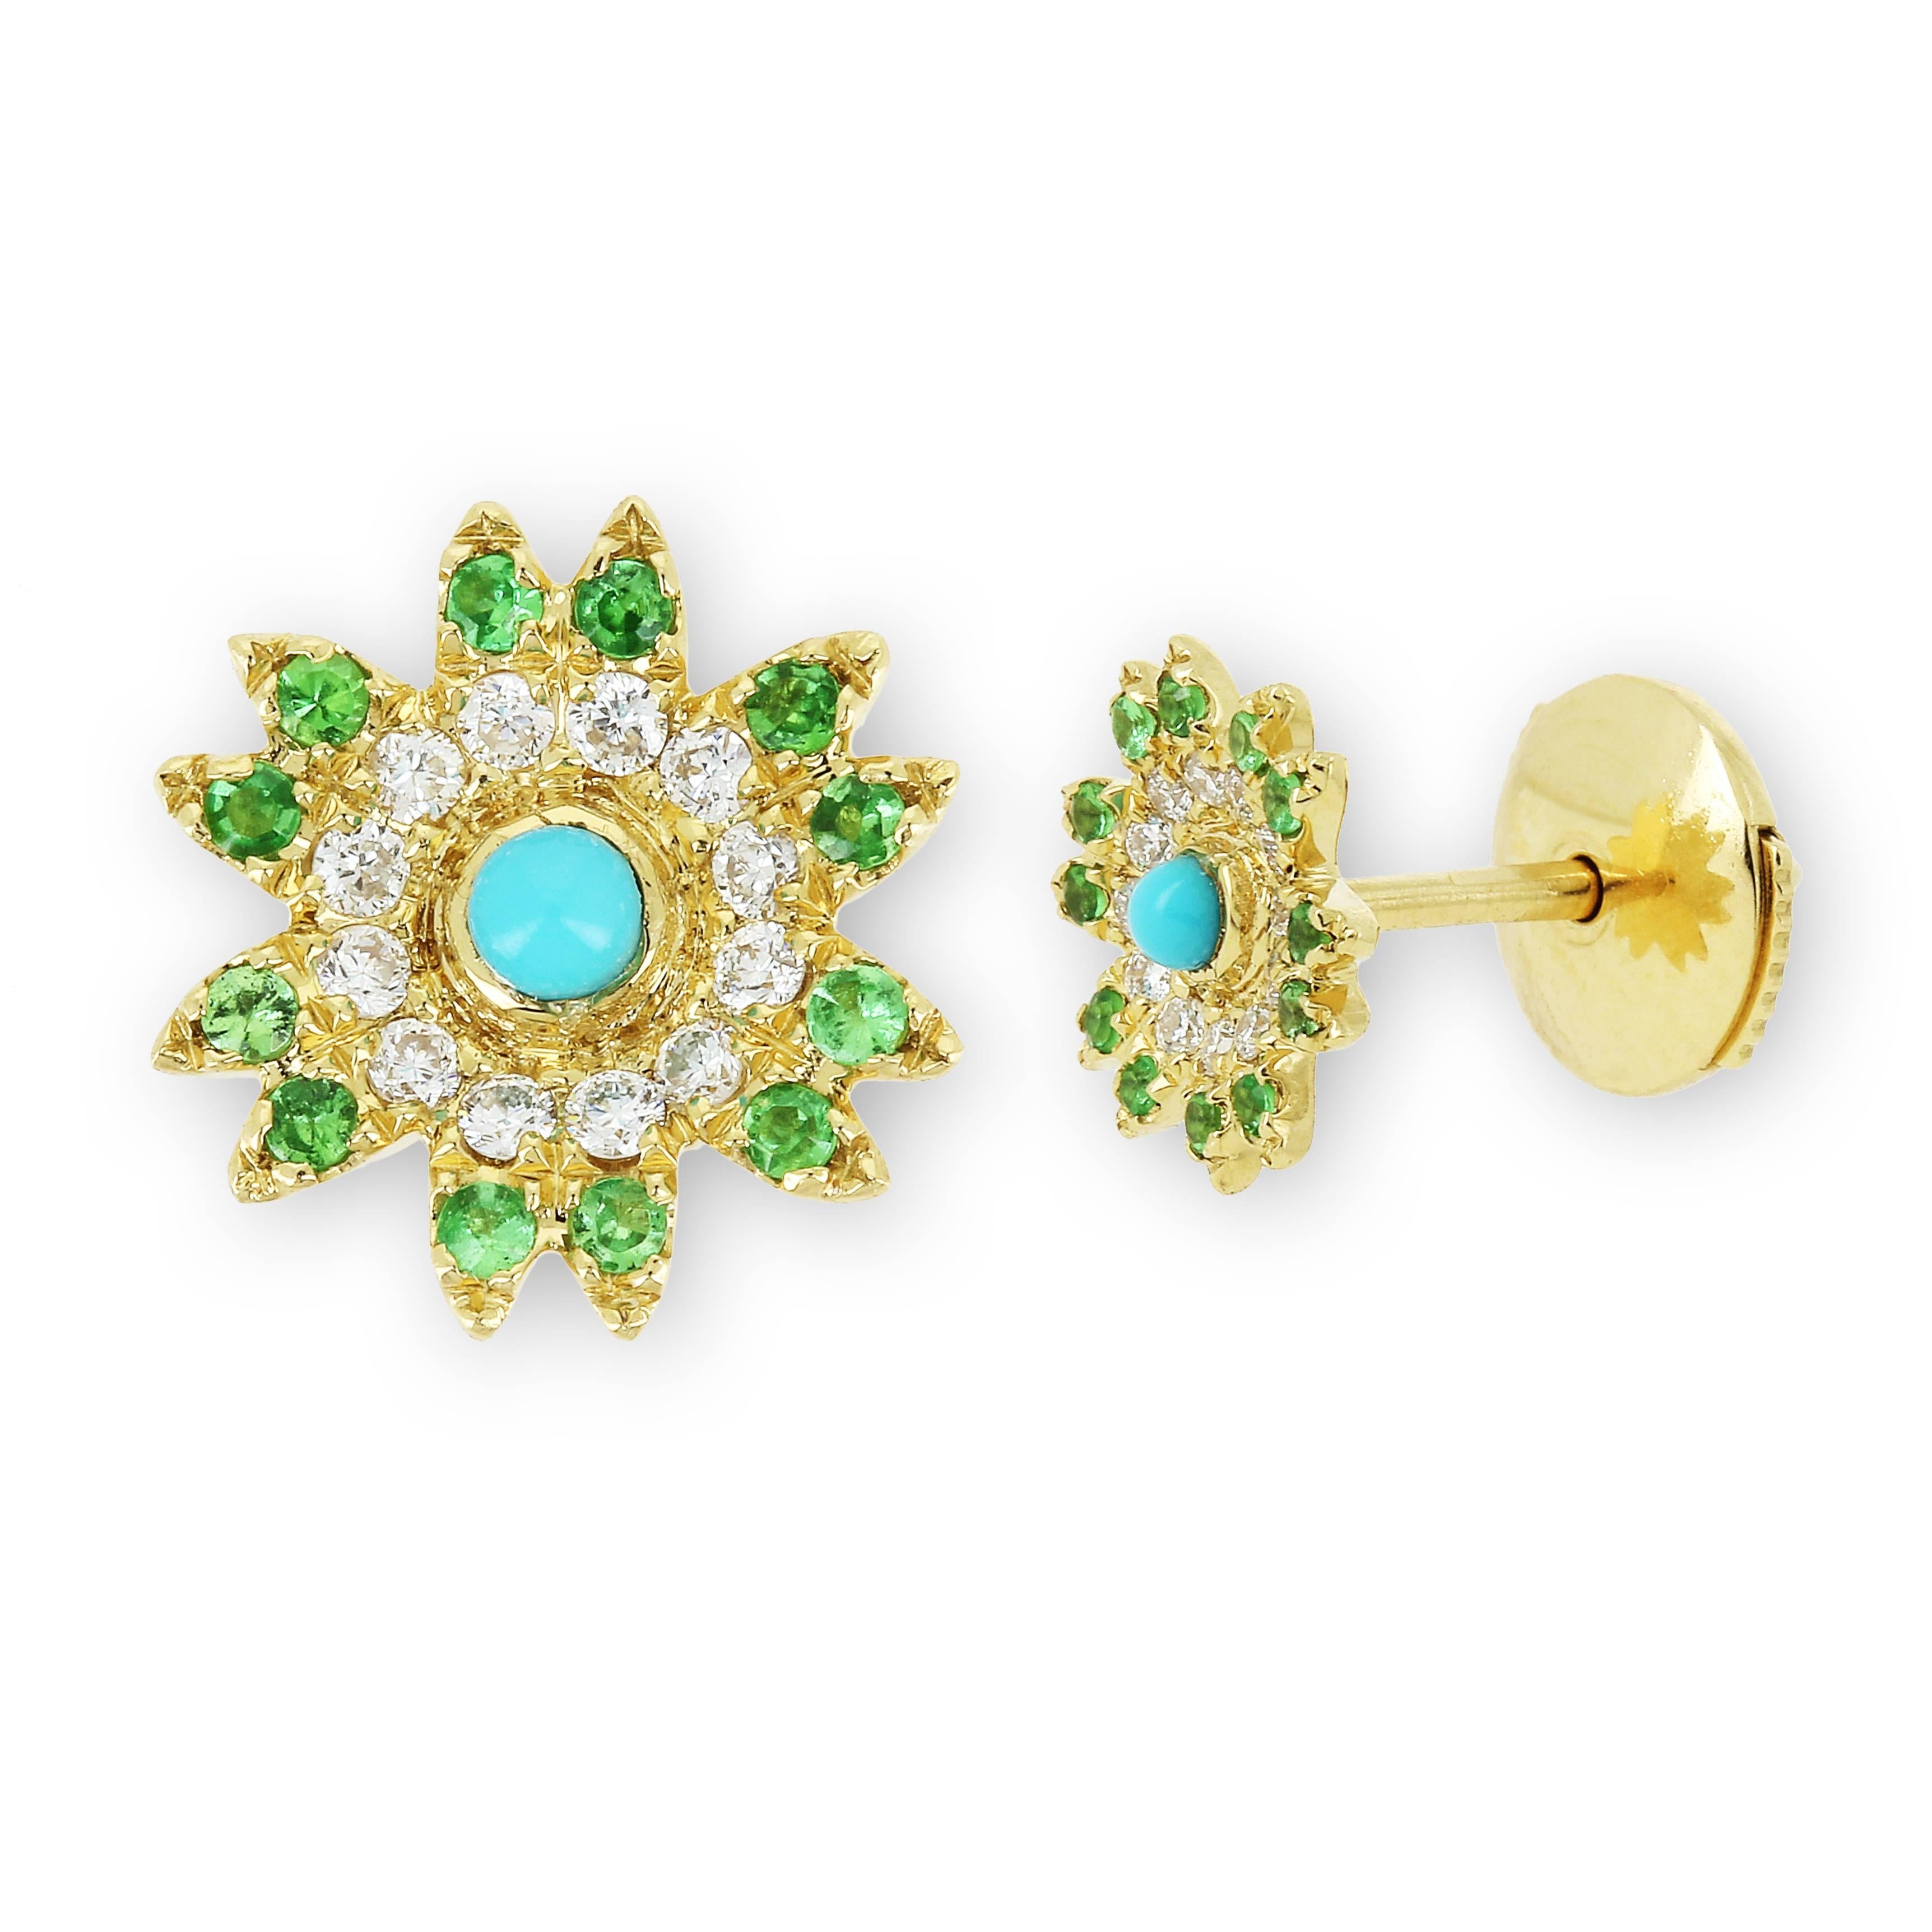 Stud and ear-jacket in 18K Yellow Gold
Stud: 1,1gr approx.
Diamonds 0,7ct approx.
Tsavorites 0,07ct approx.
Turquoise 0,015ct approx.

Ear-Jacket: 1,5gr approx.
Diamonds 0,20ct approx.
Tsavorites 0,15ct approx.
Turquoise 0,07ct approx.
Sold as a